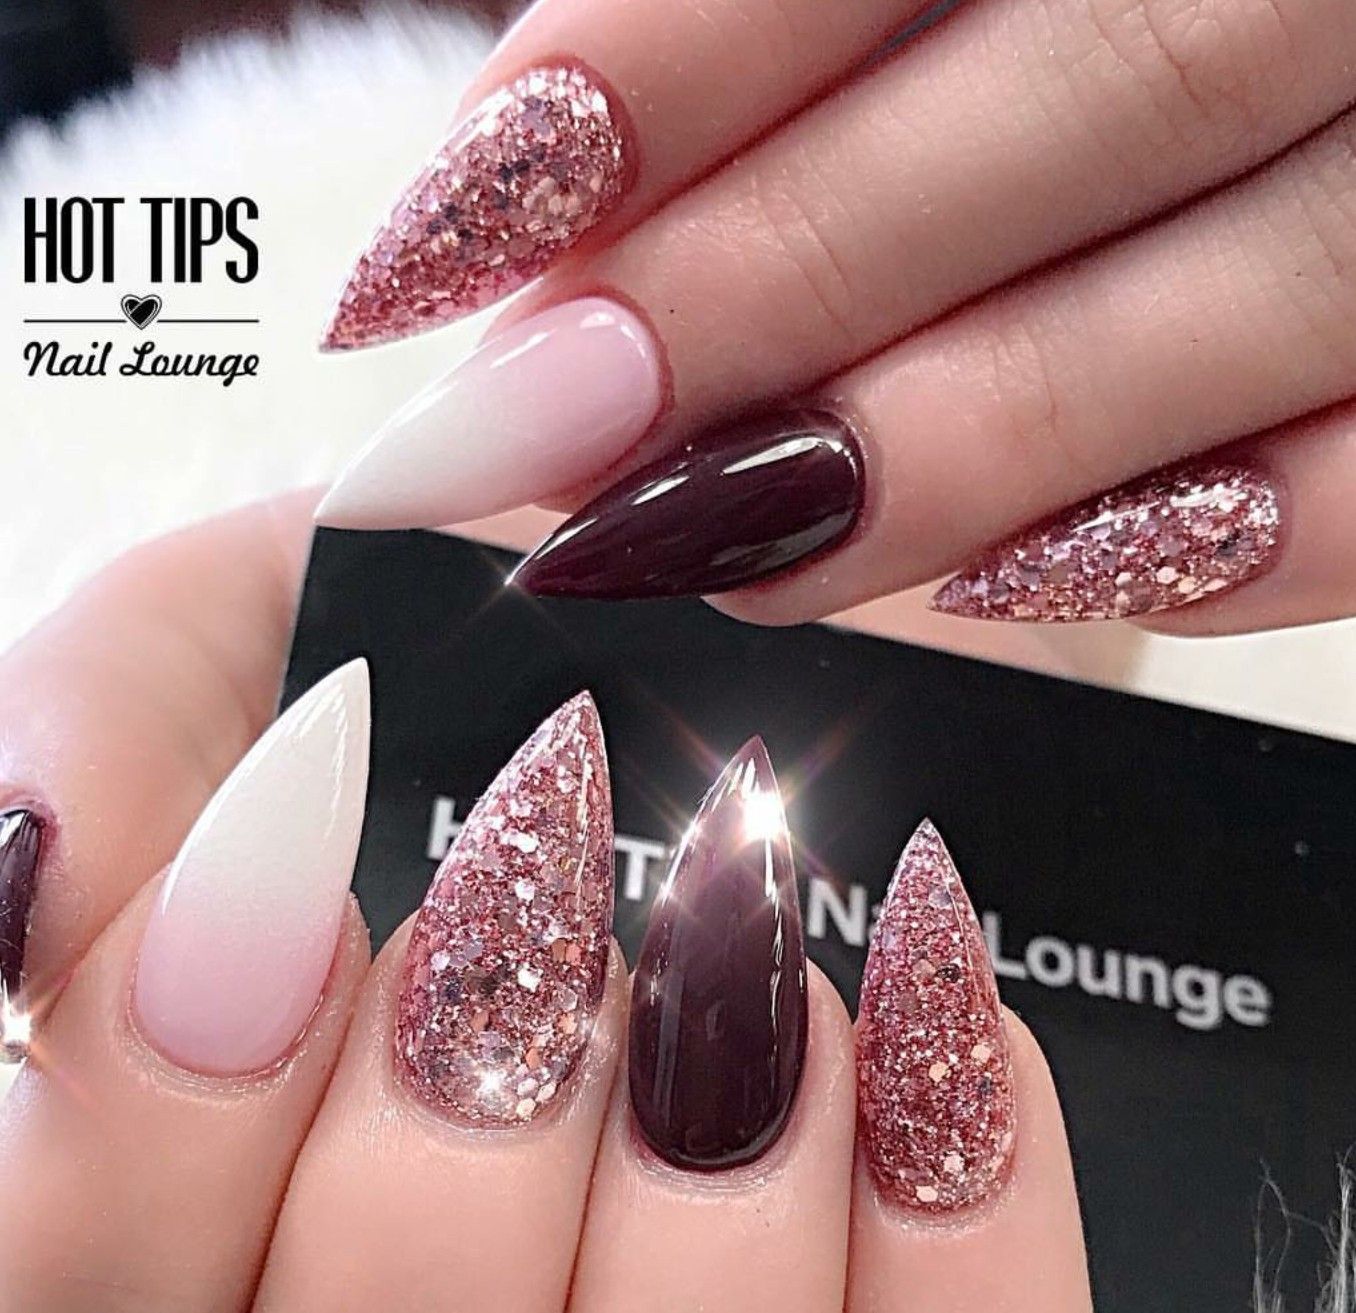 Stiletto Nails Fall Nails Burgundy Nails Ombre Nails Glitter Nails Acrylic Nails Burgundy Nails Ombre Nails Fall Acrylic Nails